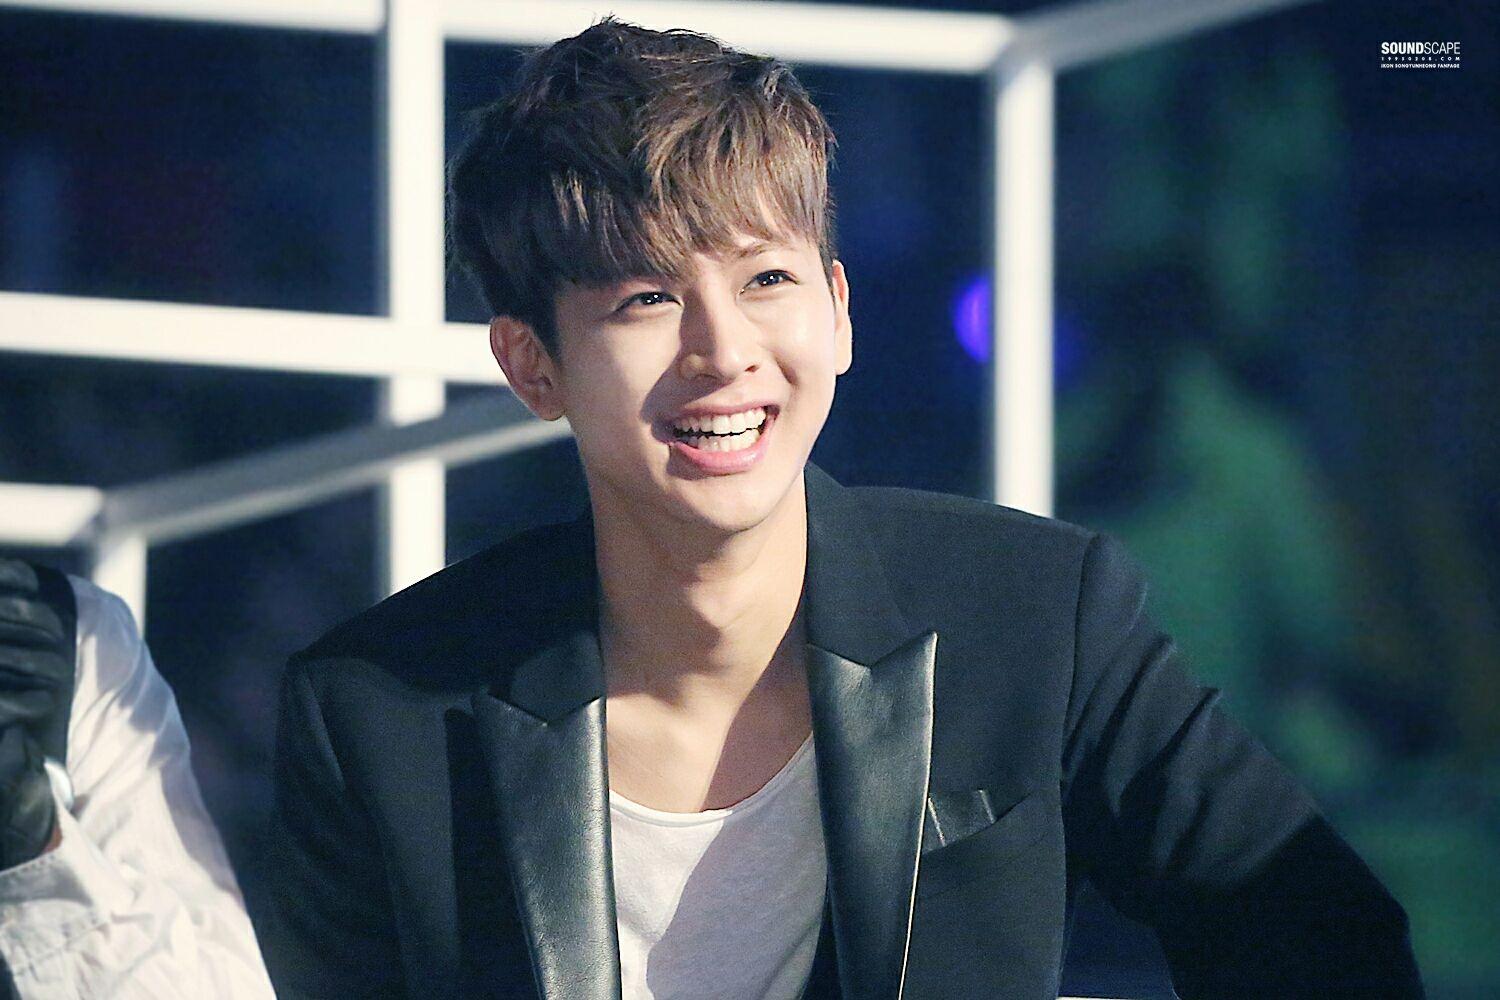 iKON's Song Yunhyeong's gorgeous smile